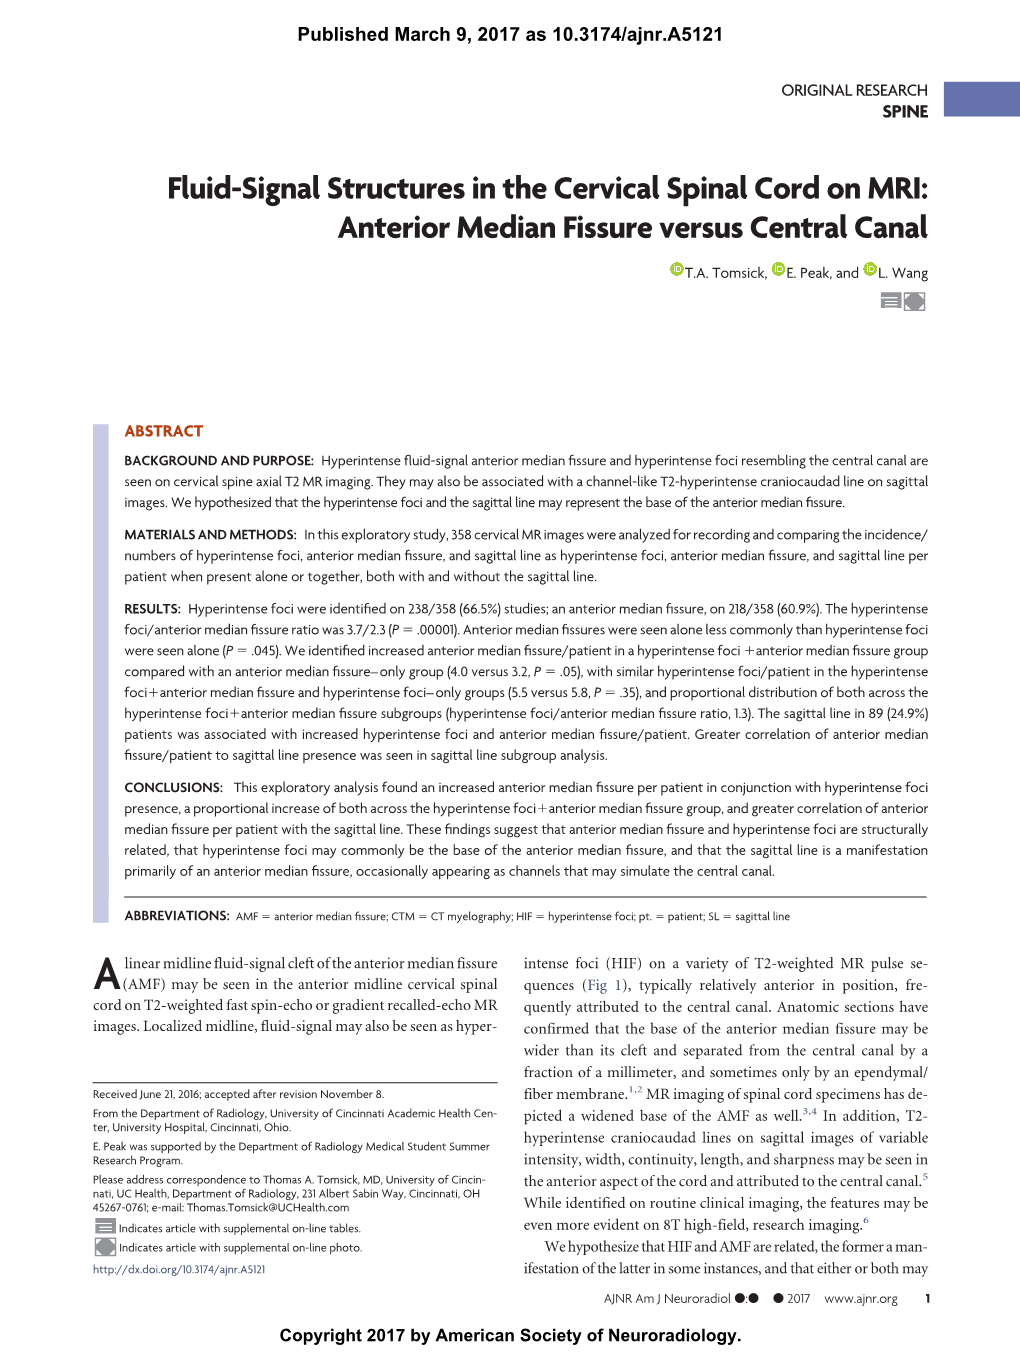 Anterior Median Fissure Versus Central Canal